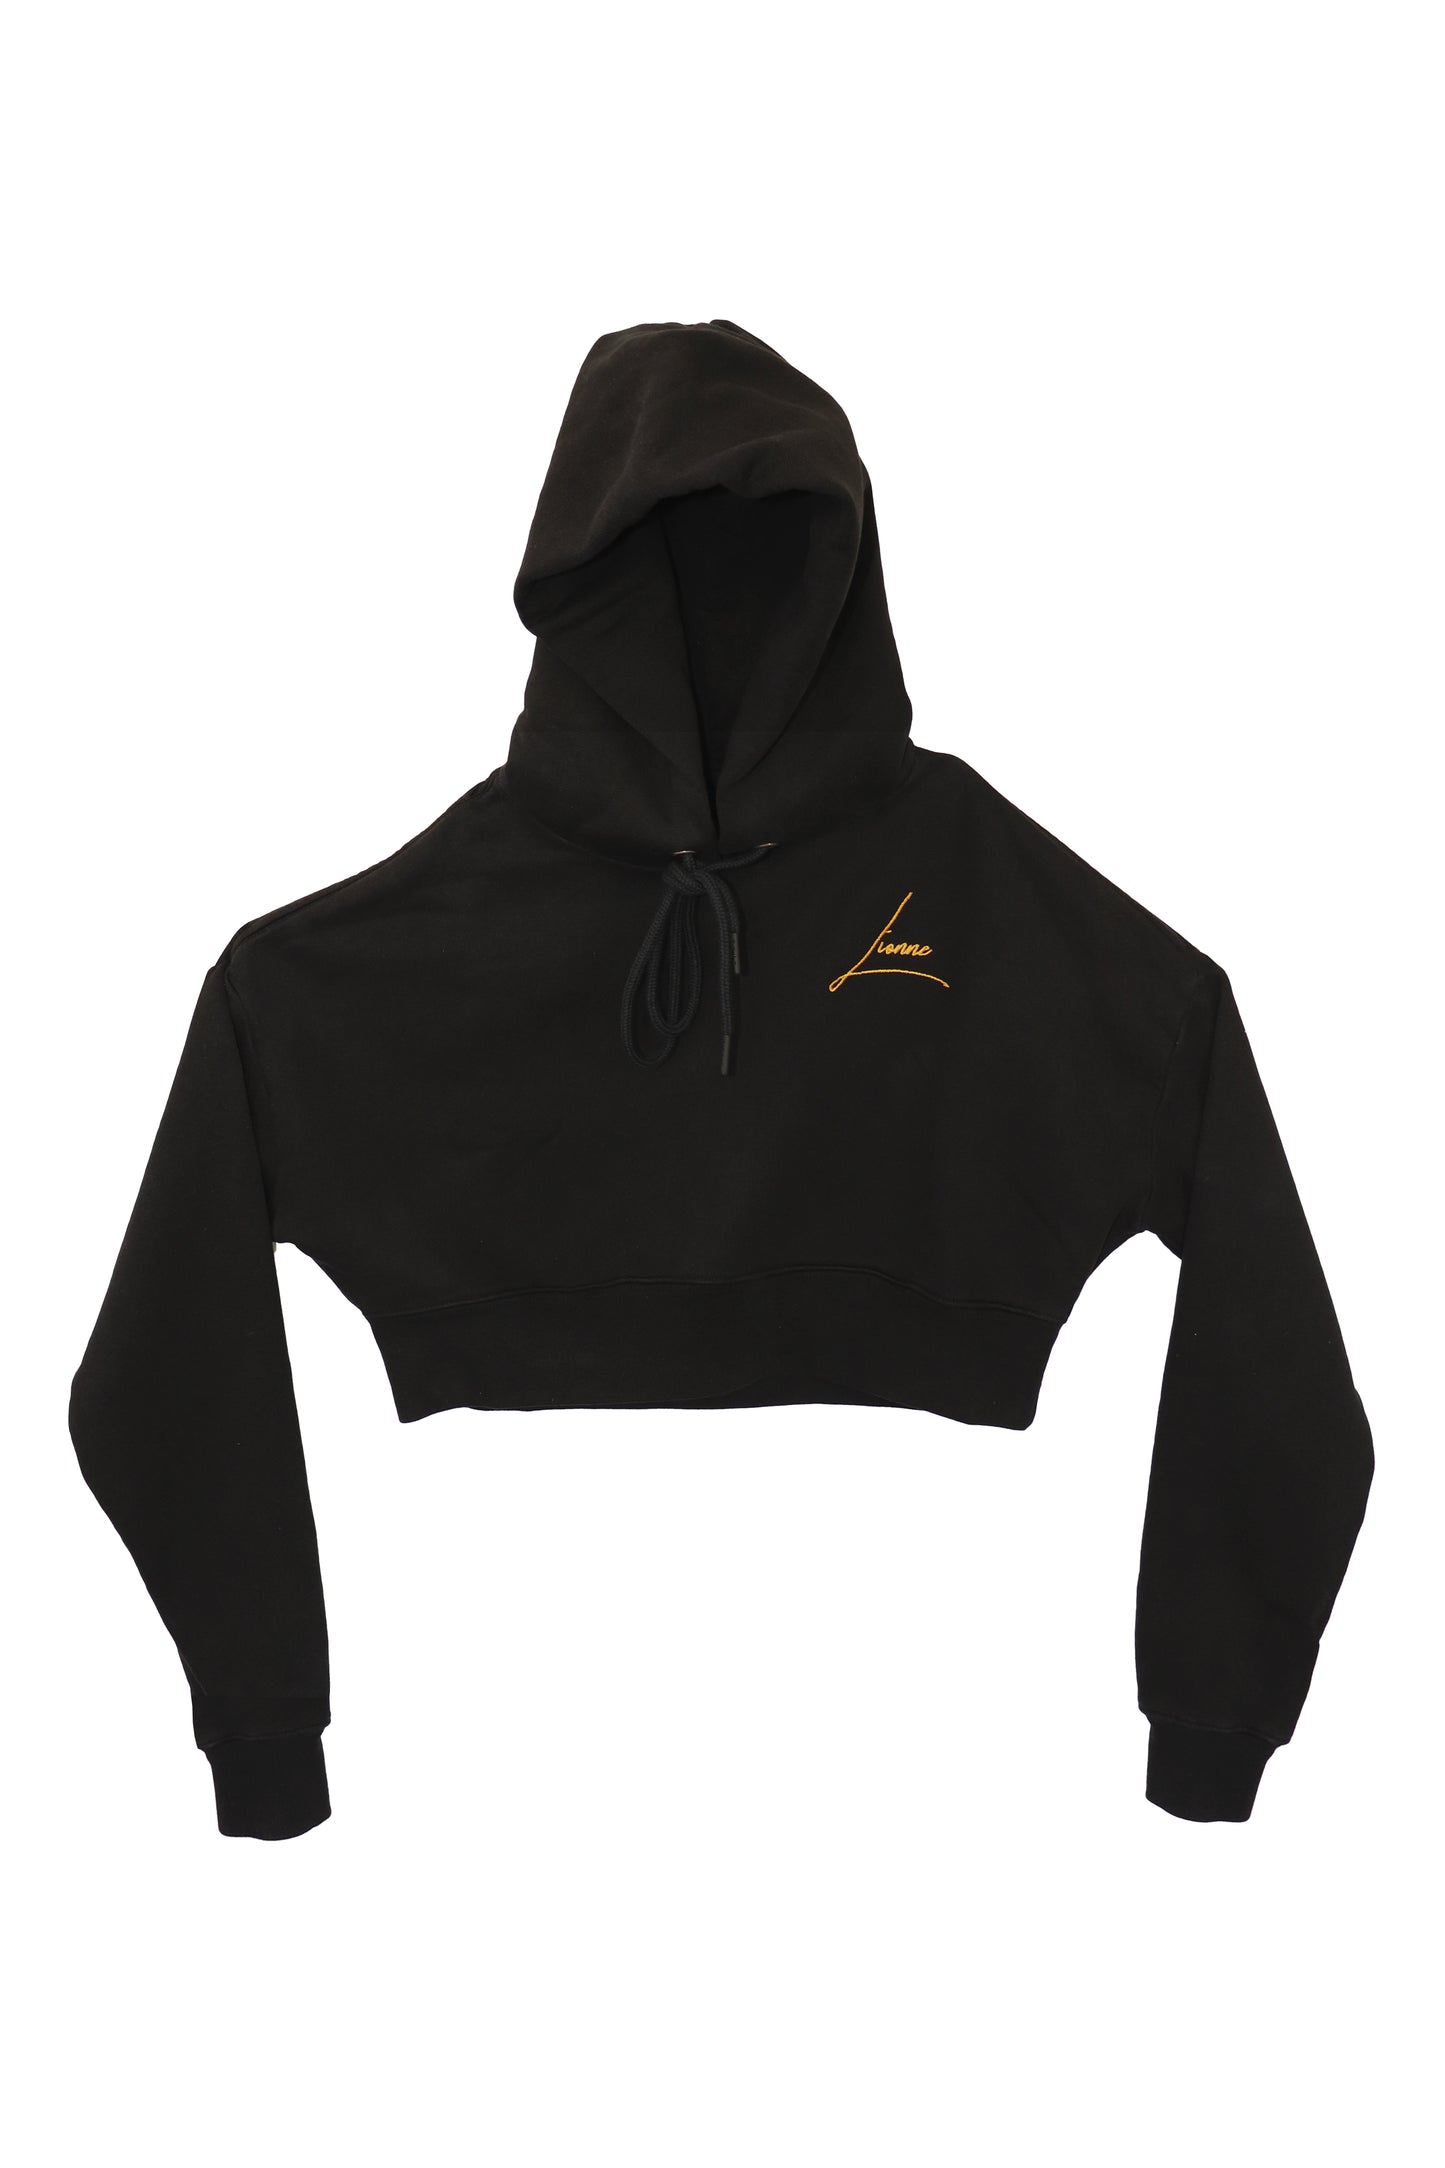 Lionne Signature Cropped Hoodie